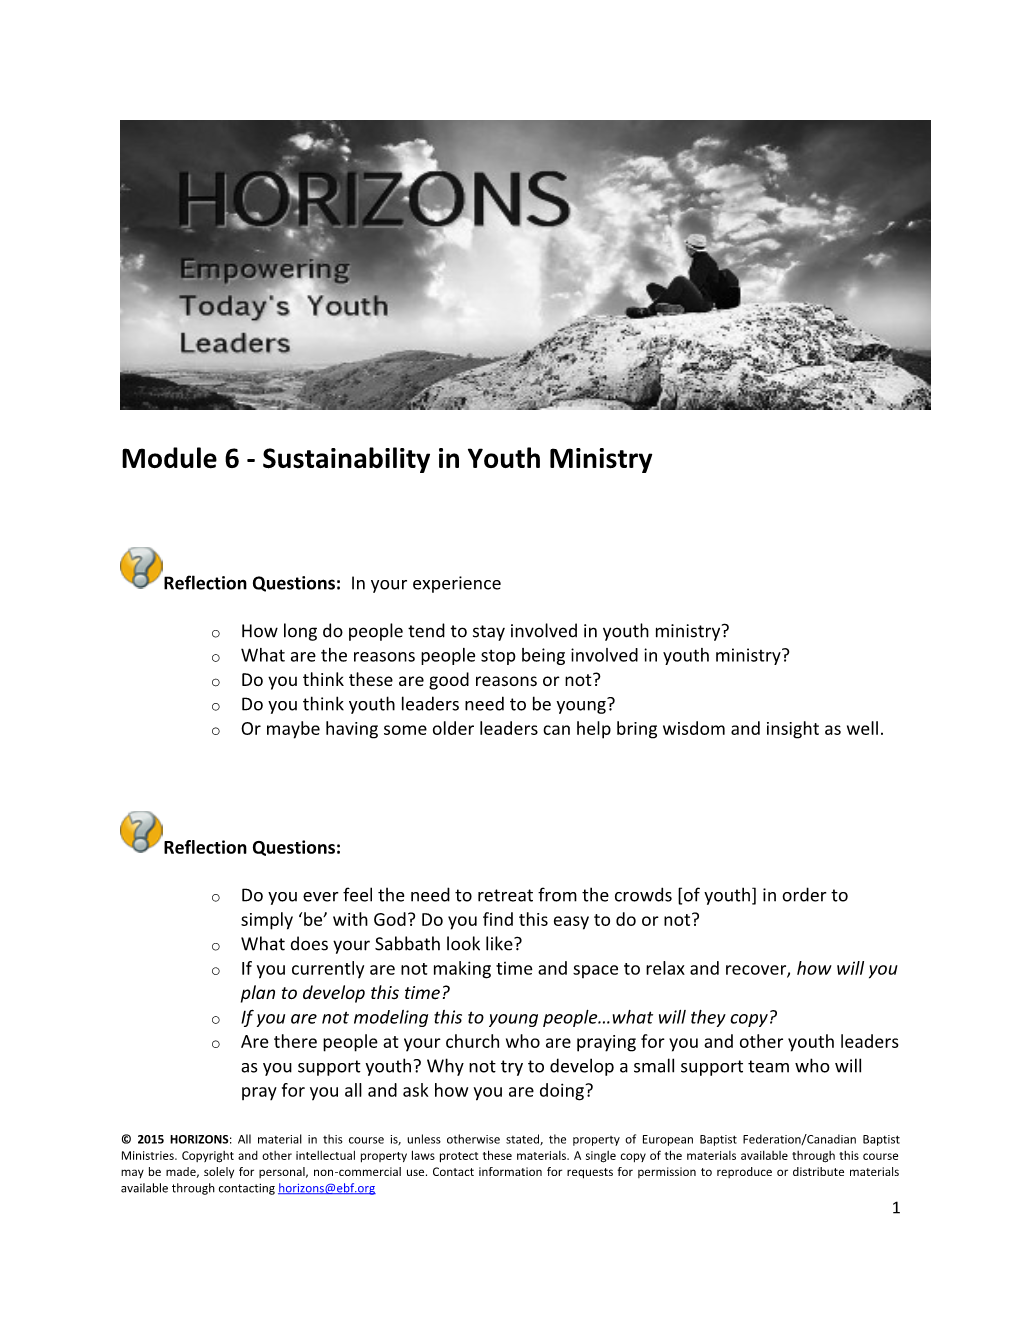 Module 6 - Sustainability in Youth Ministry